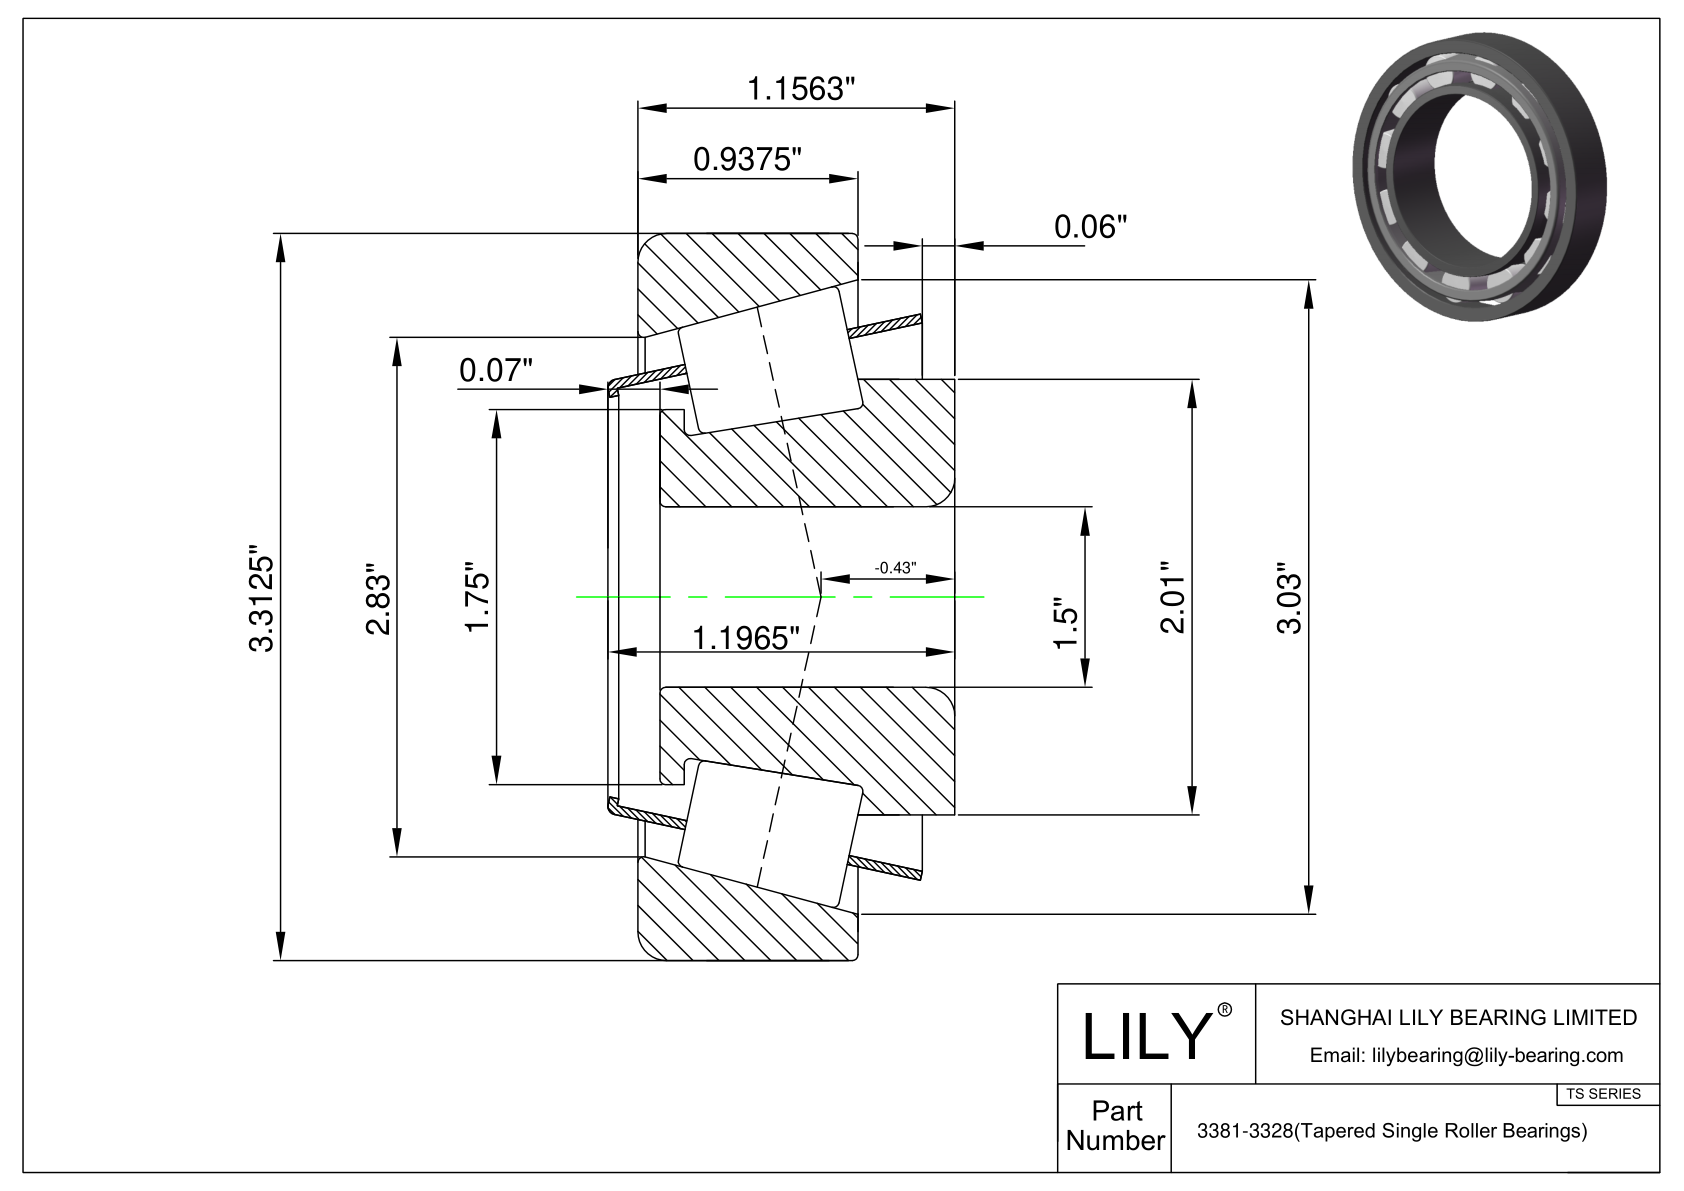 3381-3328 TS (Tapered Single Roller Bearings) (Imperial) cad drawing